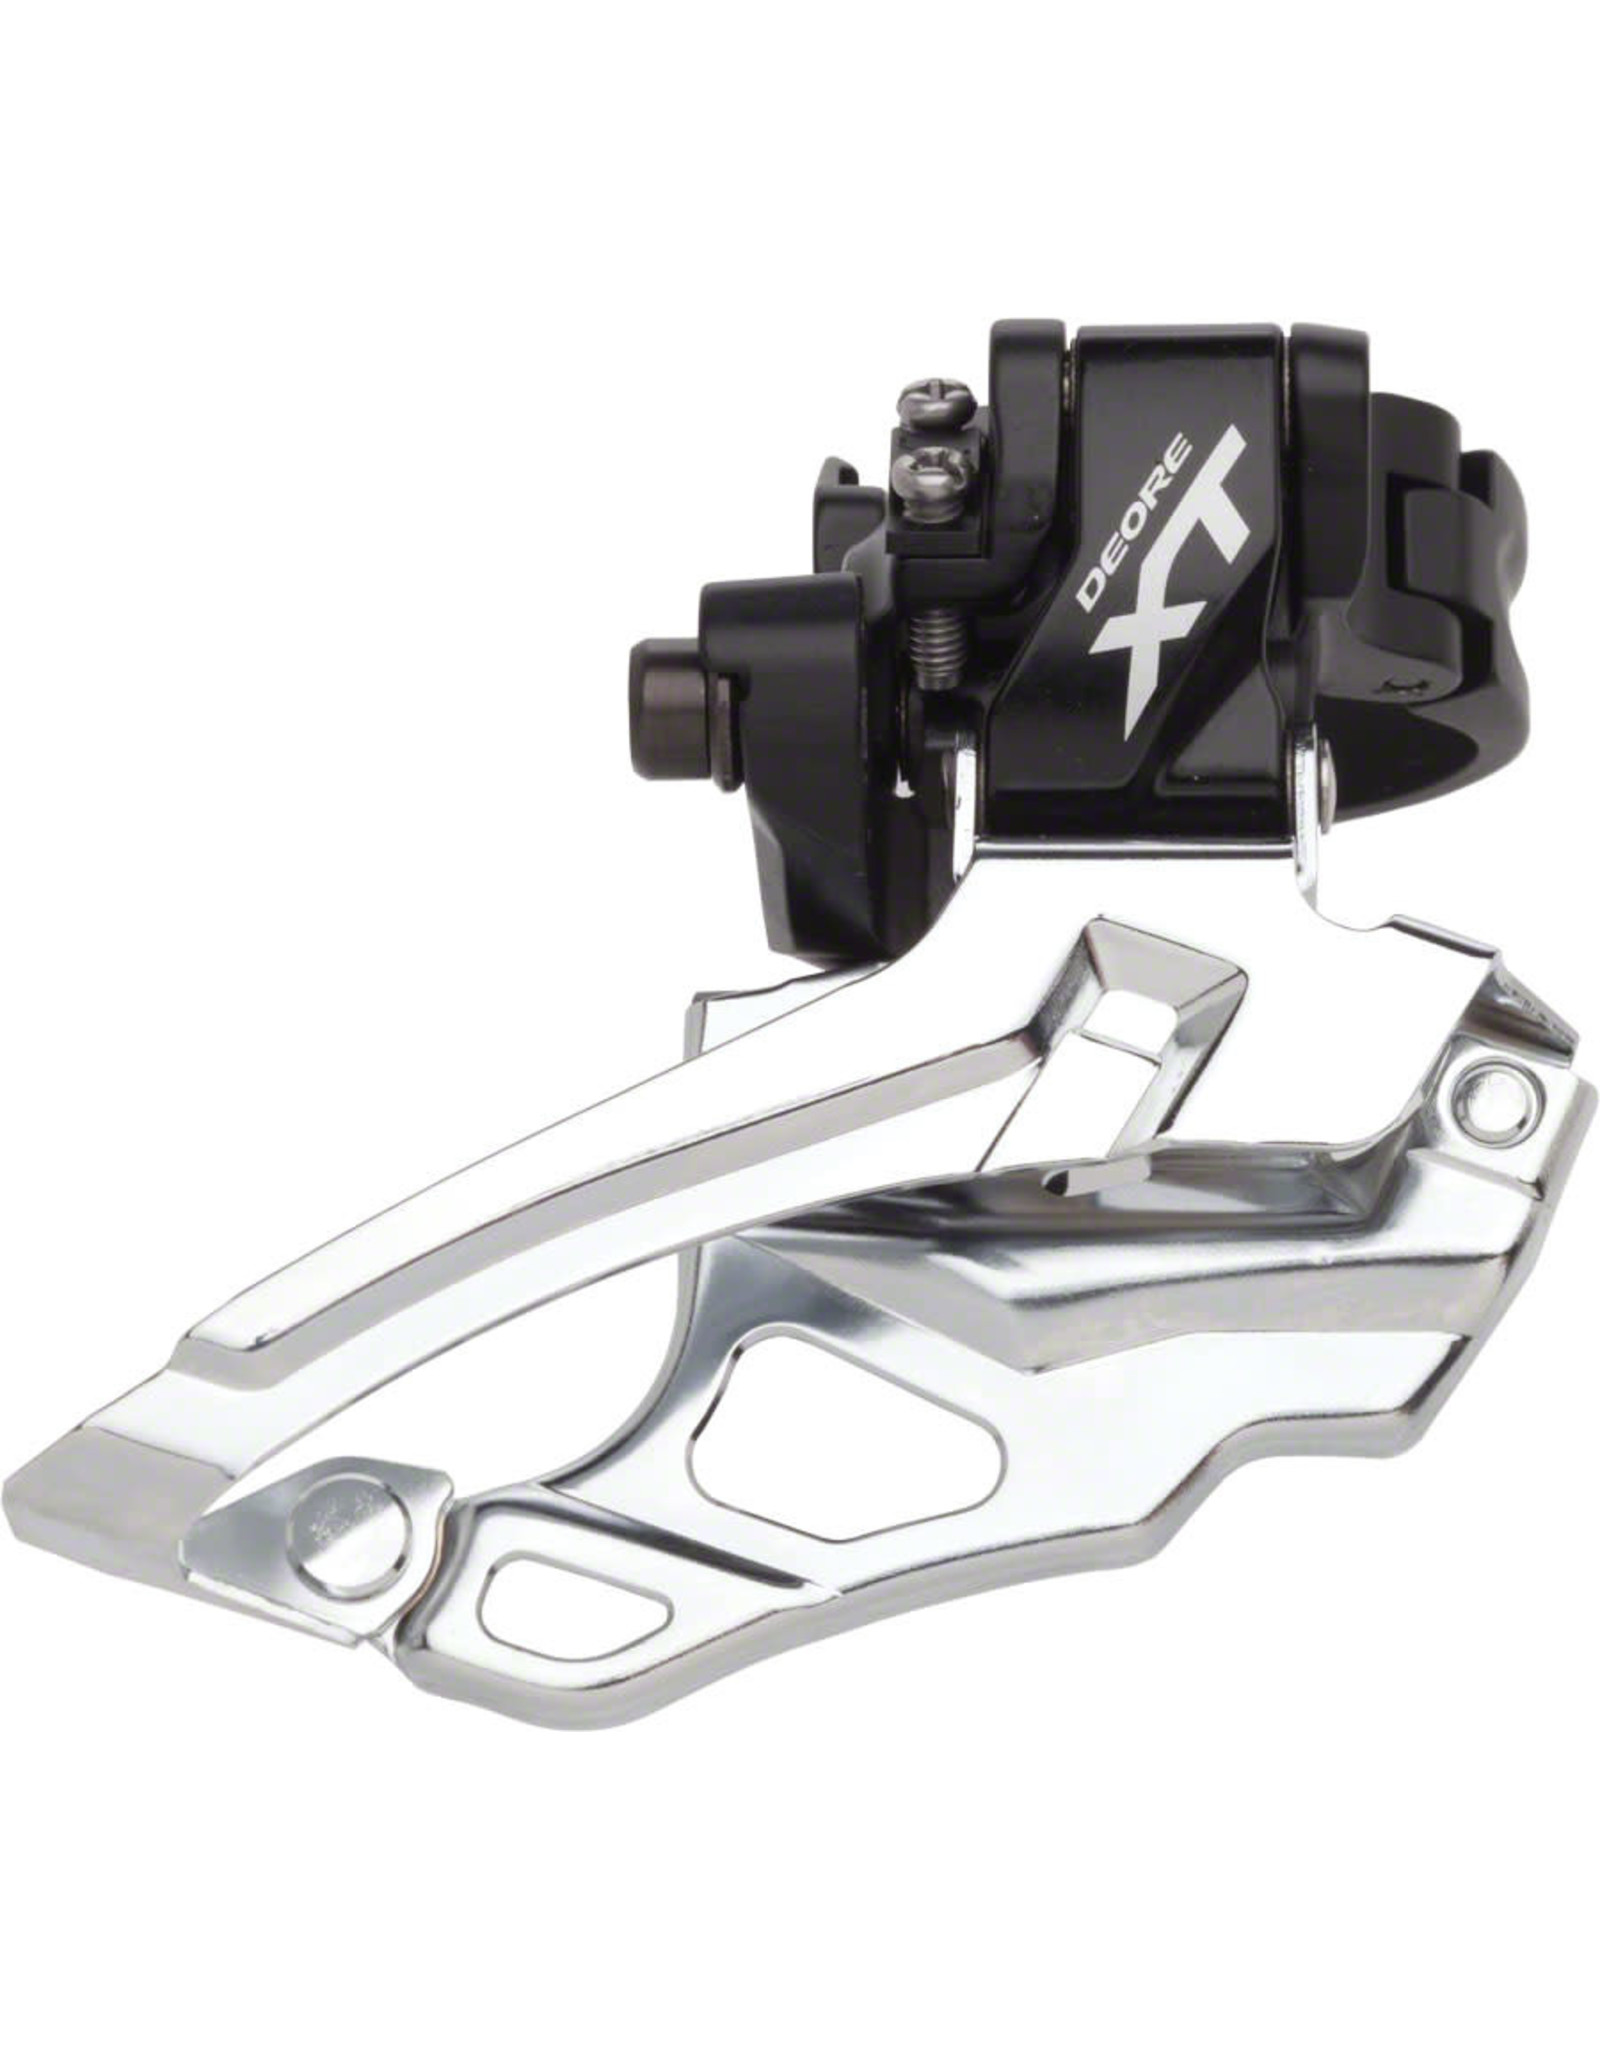 Shimano Shimano XT FD-M786 2x10 Traditional, Dual-Pull Multi-Clamp Front Derailleur